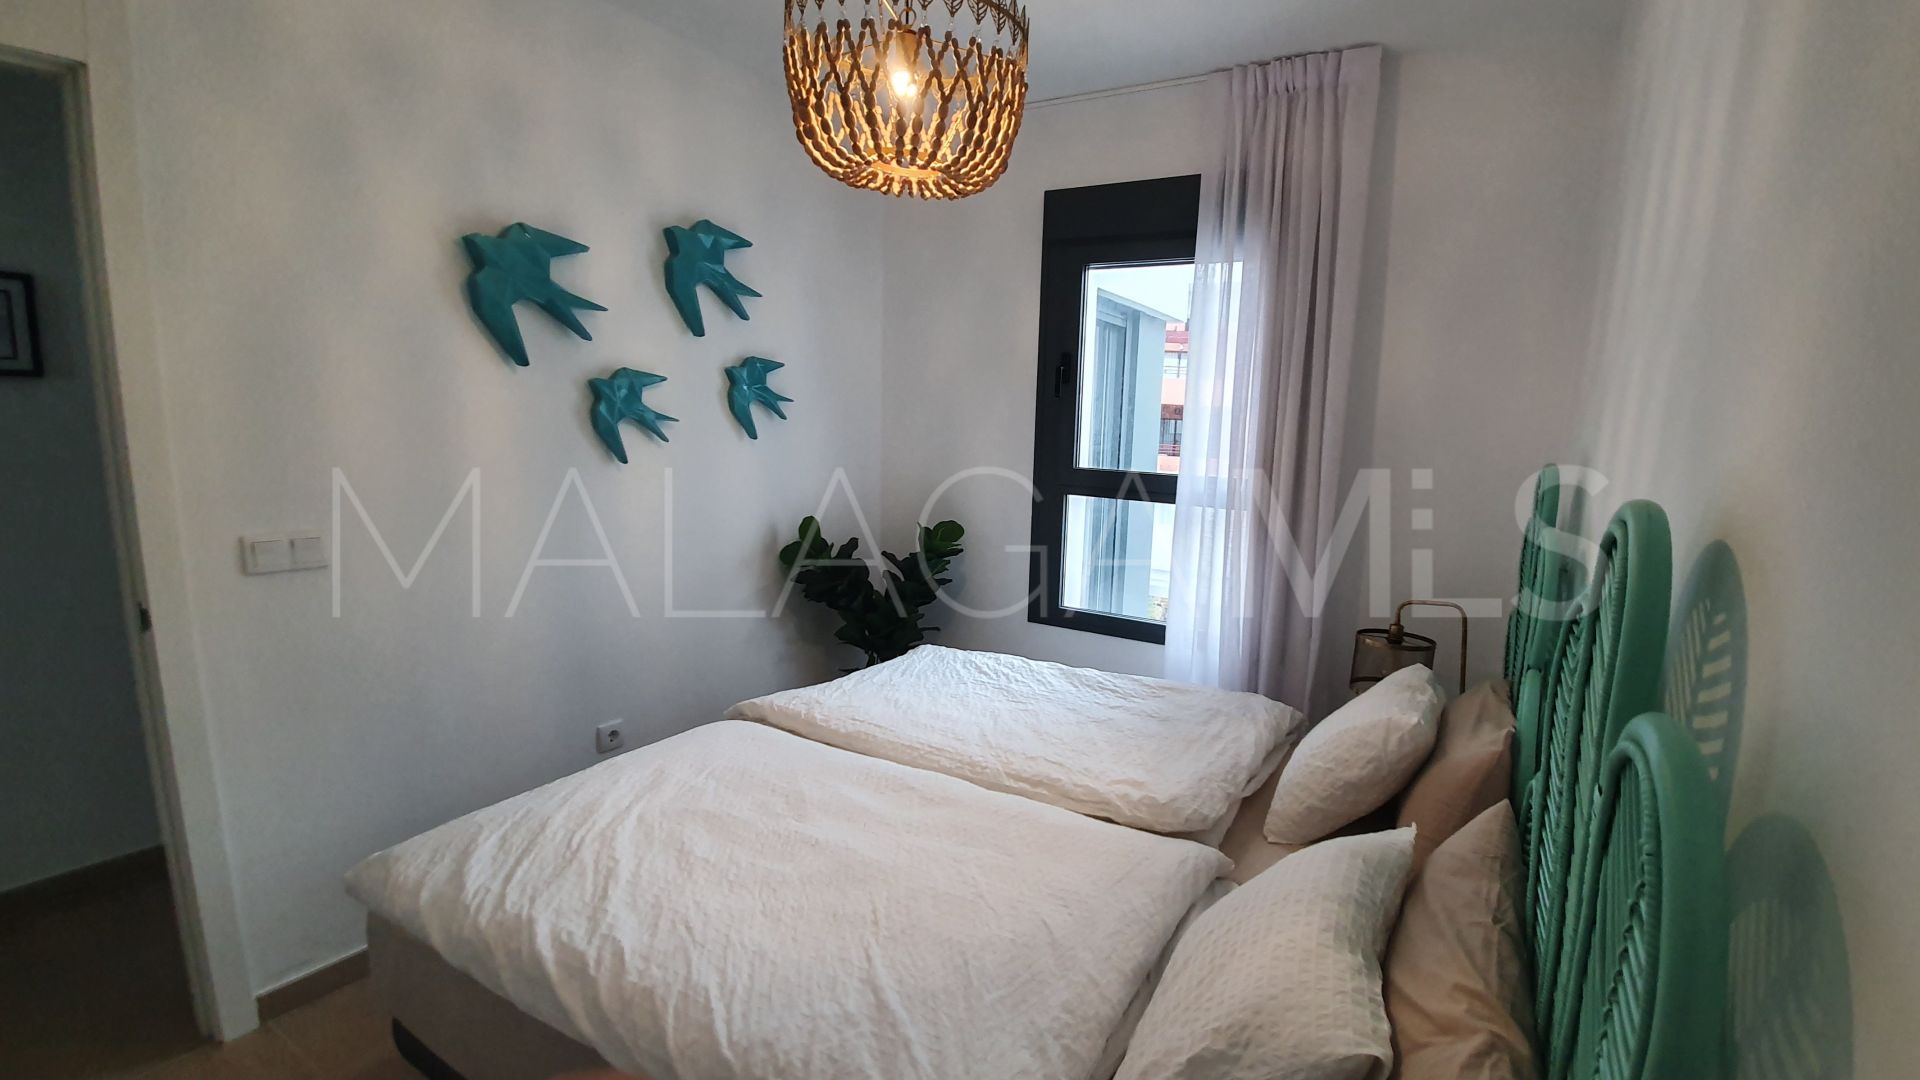 2 bedrooms Manilva penthouse for sale